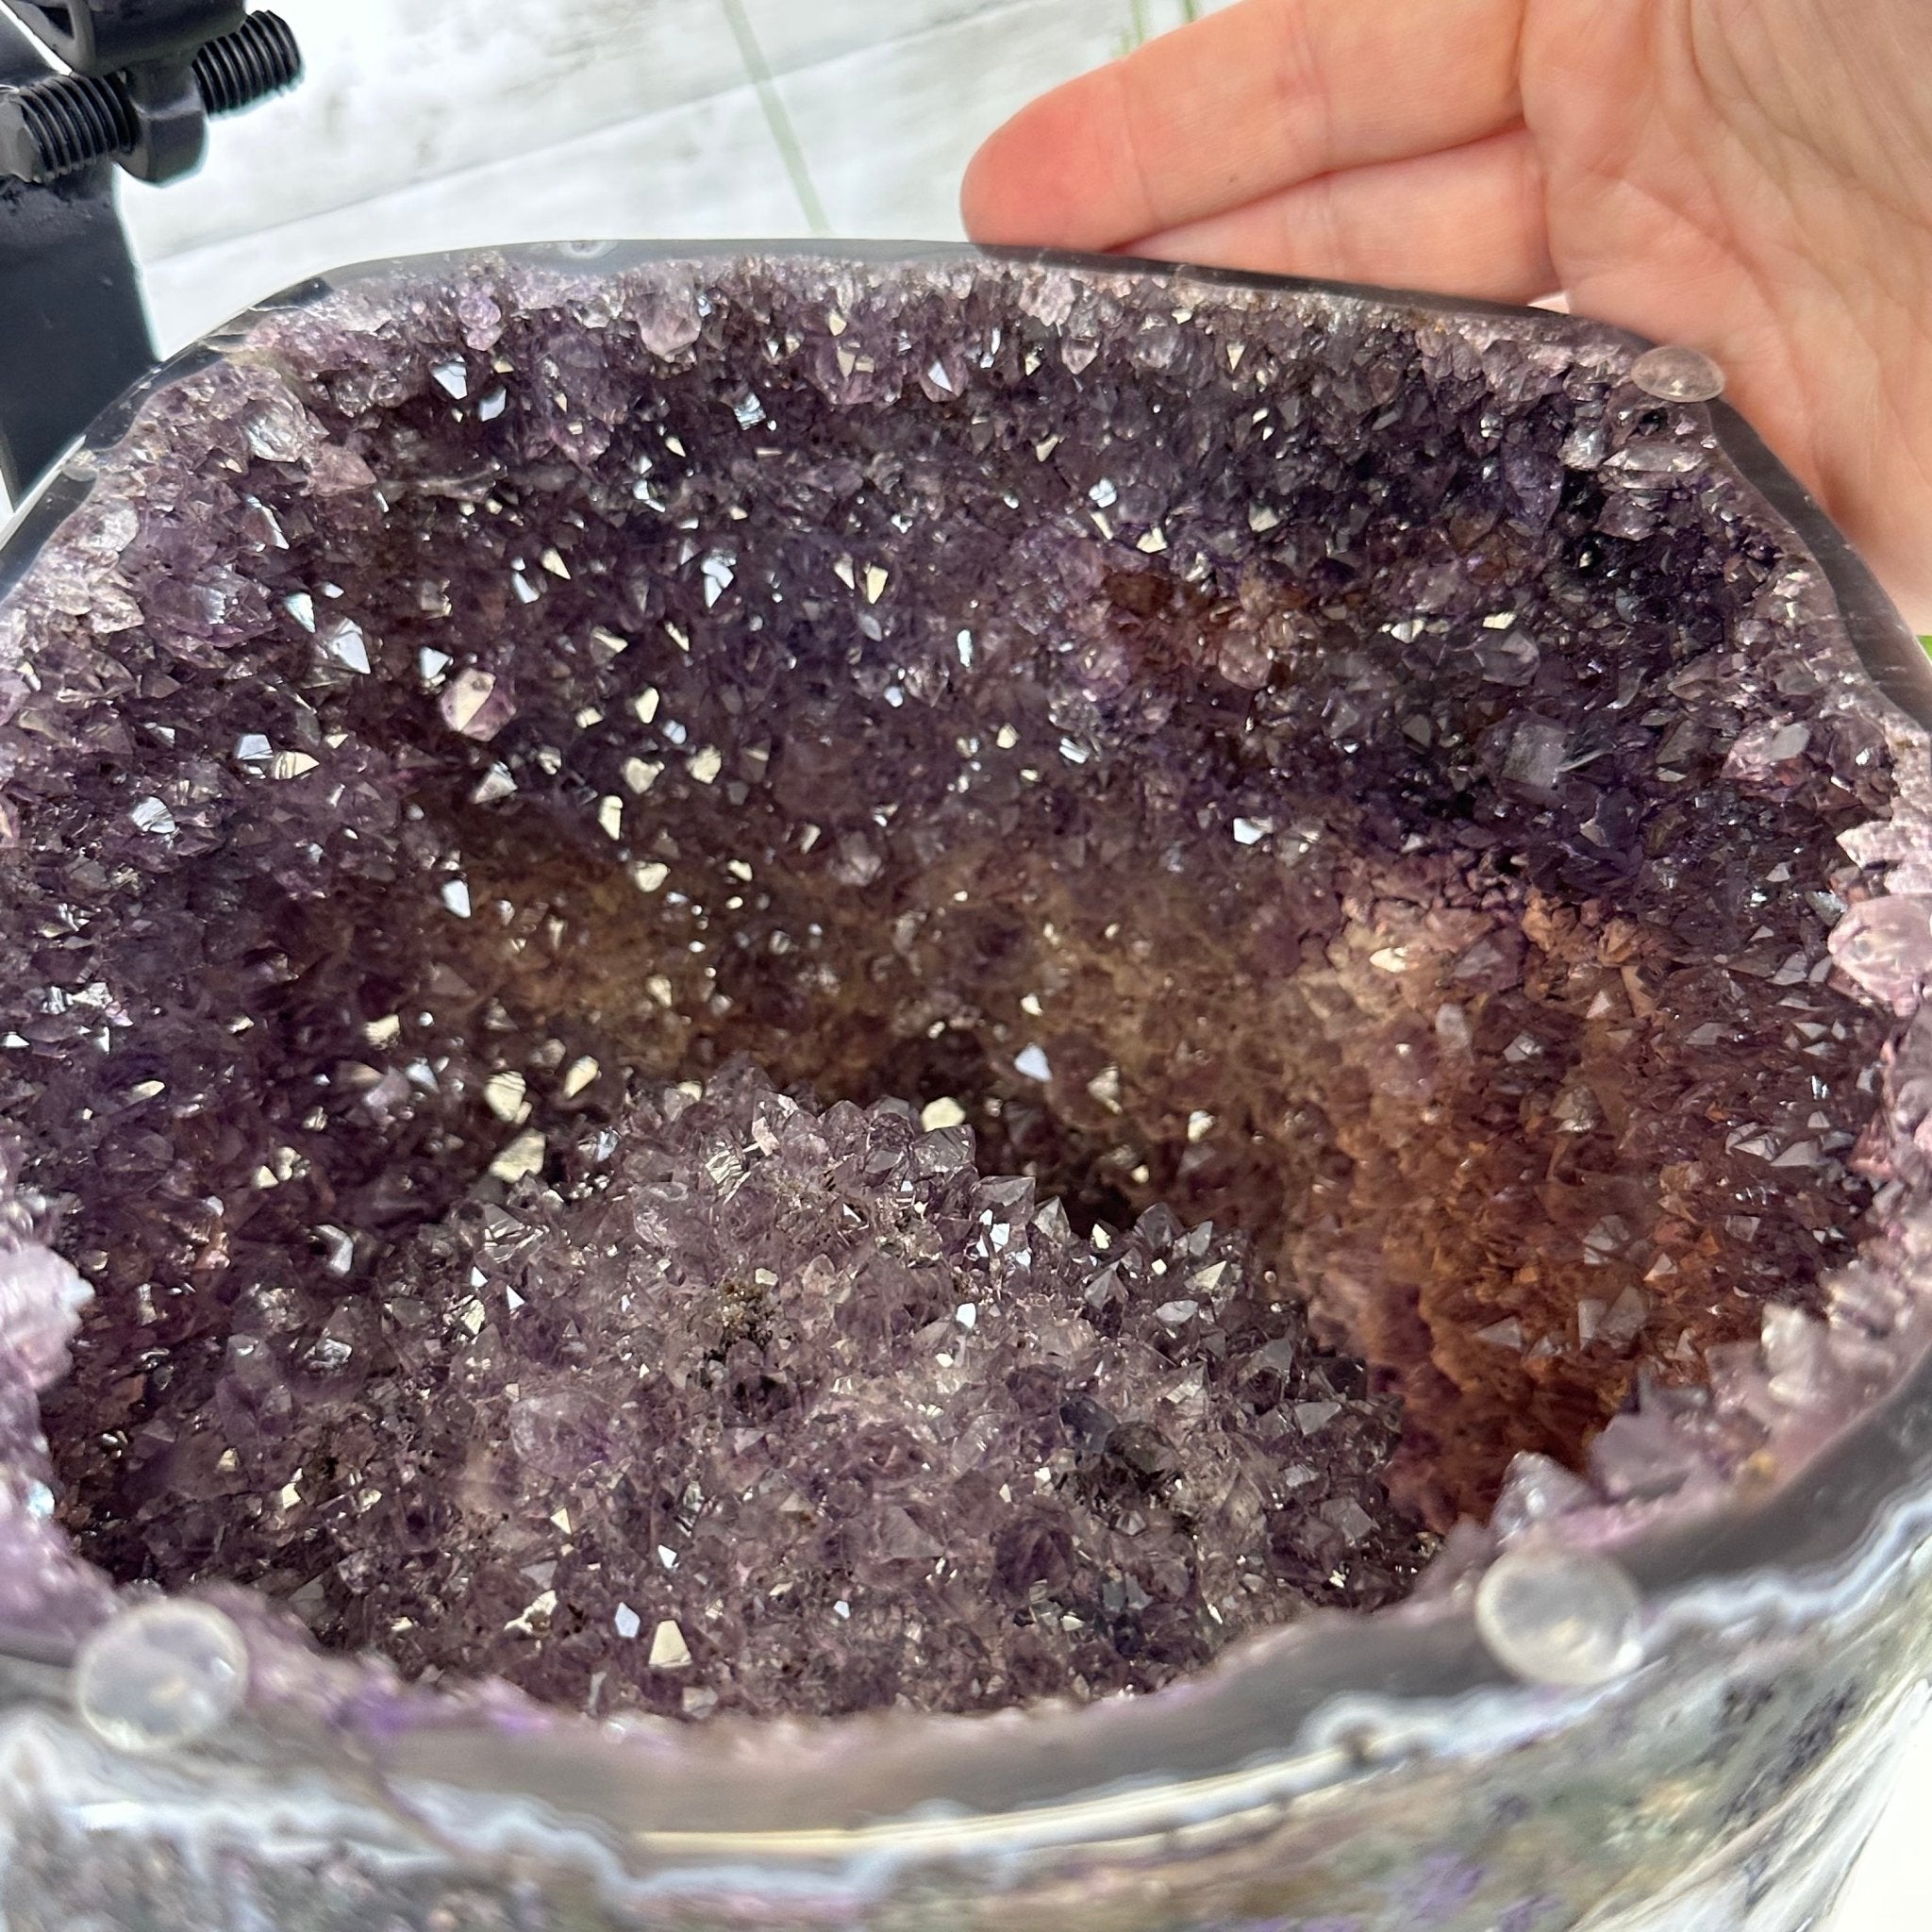 Extra Plus Quality Polished Amethyst "Jewelry Box", Clam Shell style Lid, 43.3 lbs & 19" tall, Model #5656-0013 by Brazil Gems - Brazil GemsBrazil GemsExtra Plus Quality Polished Amethyst "Jewelry Box", Clam Shell style Lid, 43.3 lbs & 19" tall, Model #5656-0013 by Brazil GemsGeode Jewelry Boxes5656-0013